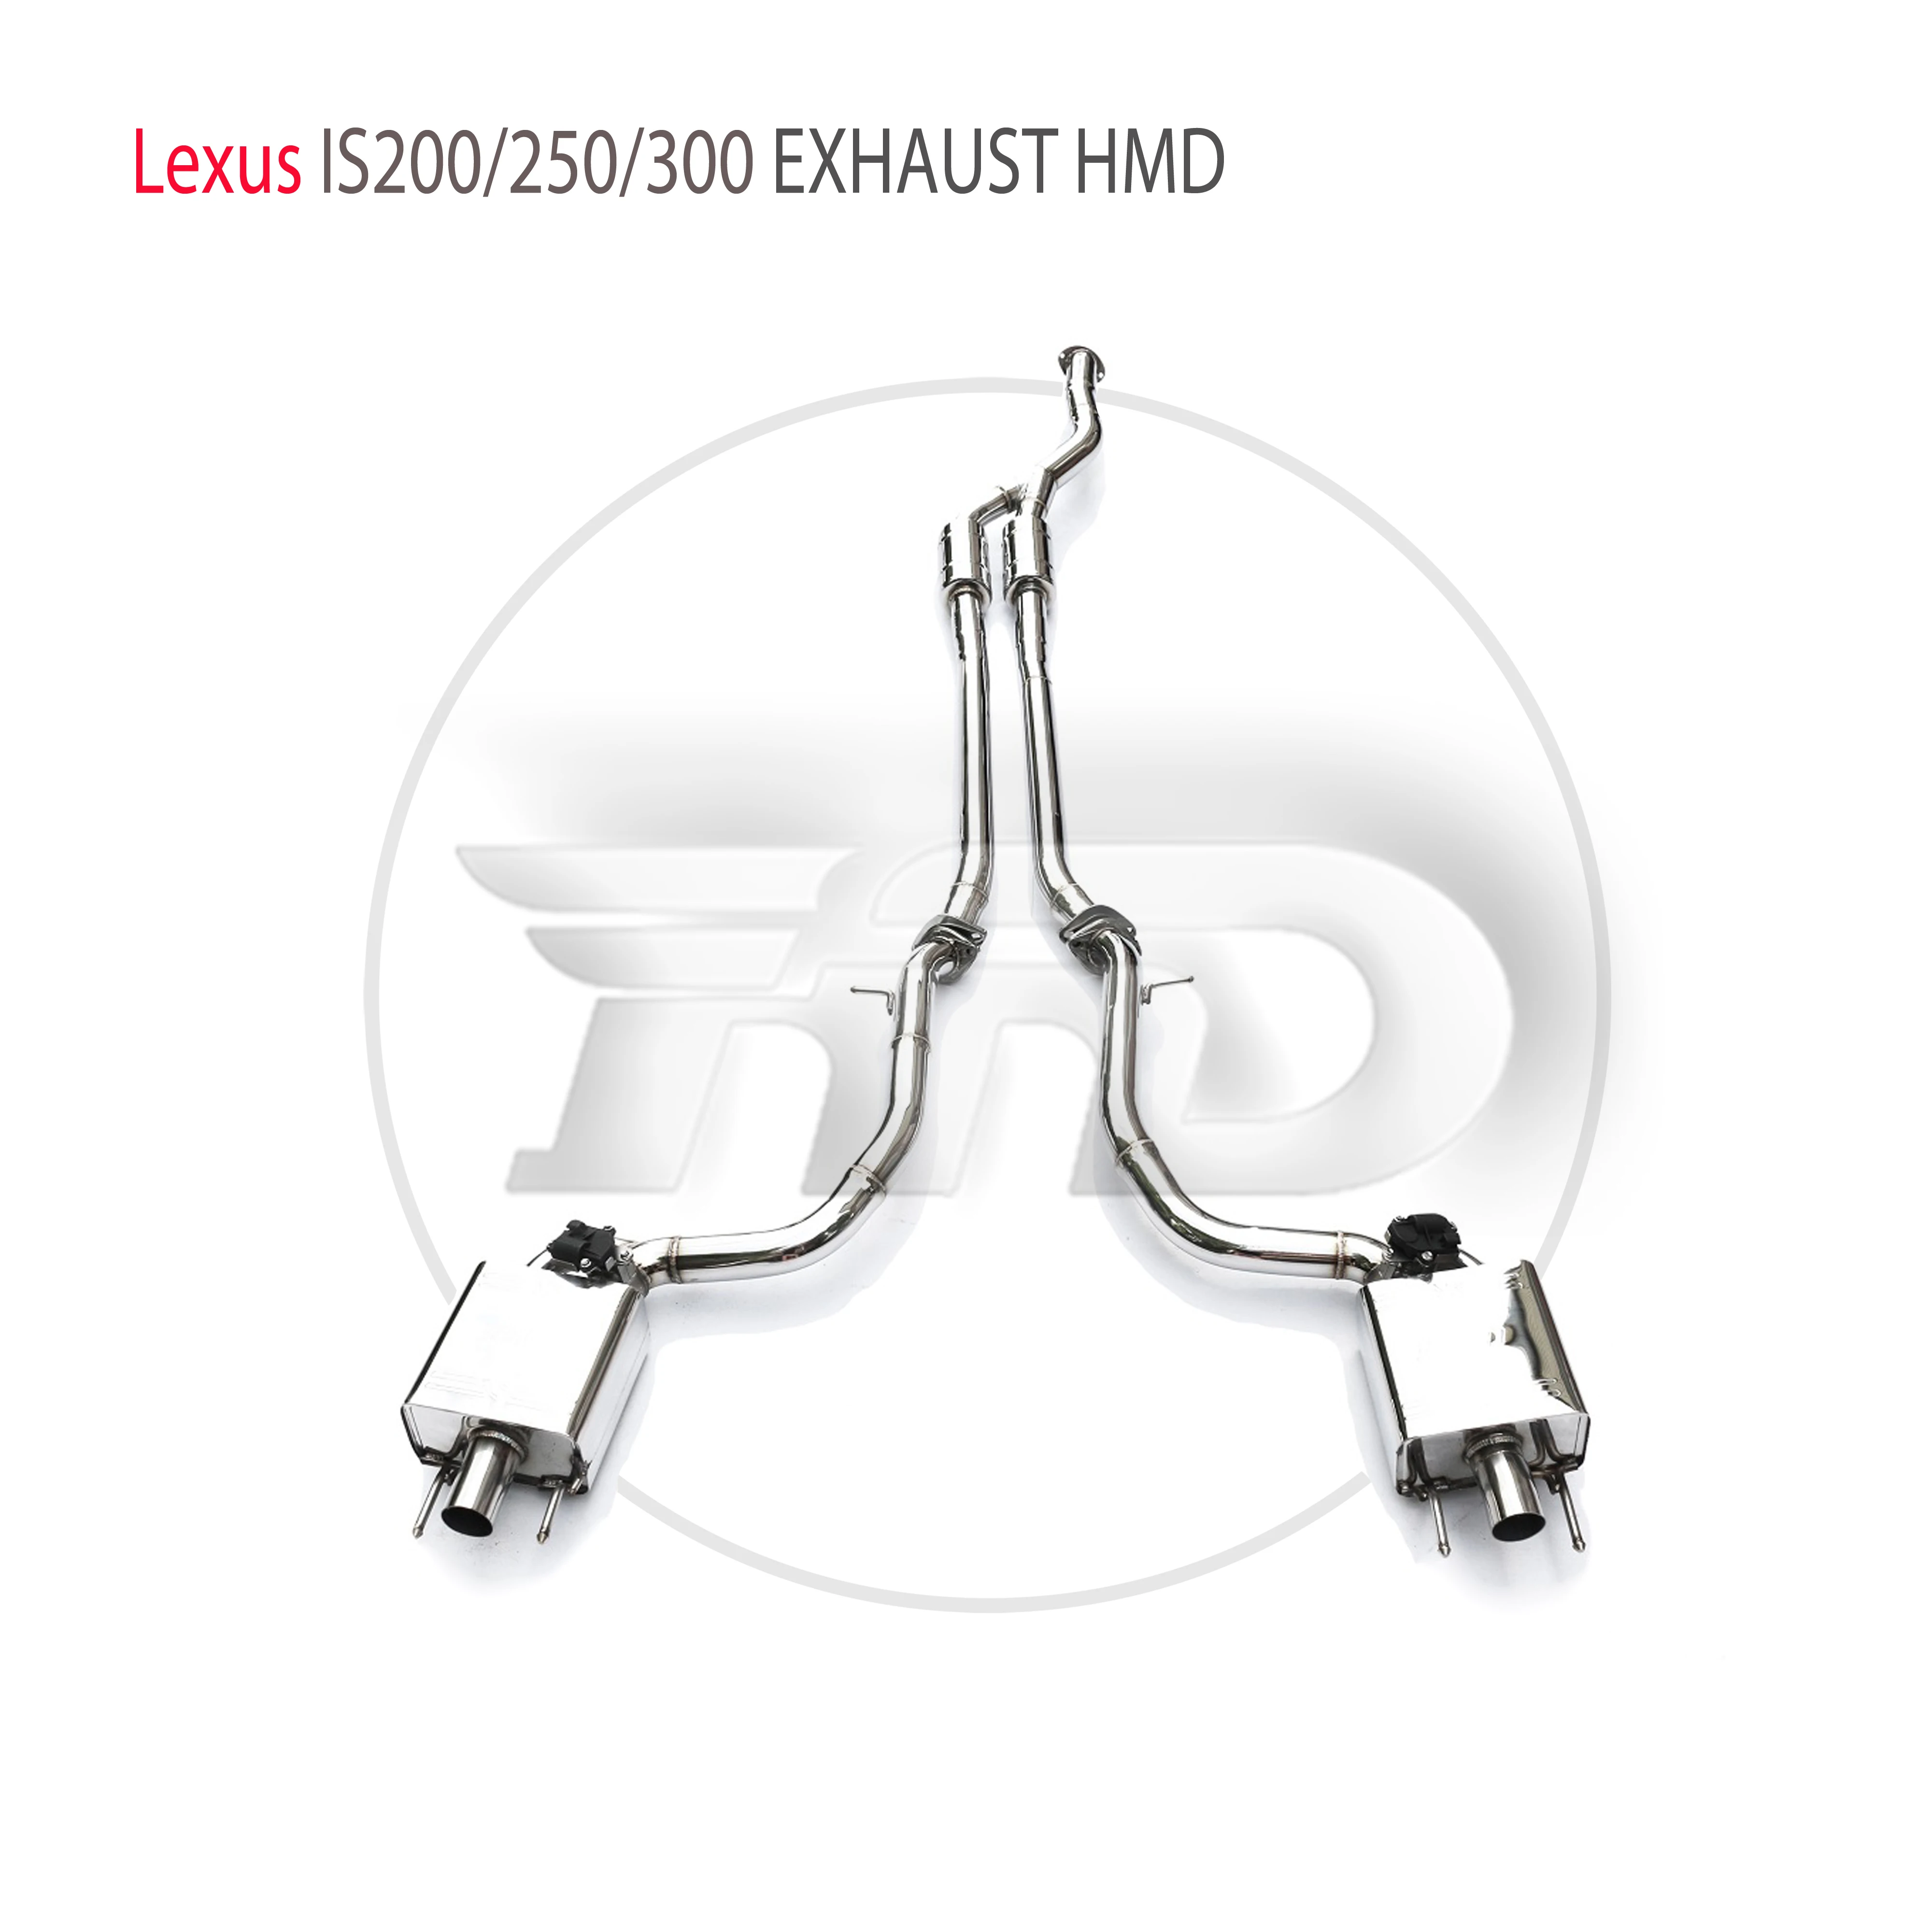 

HMD Stainless Steel Exhaust System Performance Catback for Lexus IS200 IS250 IS300 Auto Accesorios Electronic Valve Muffler